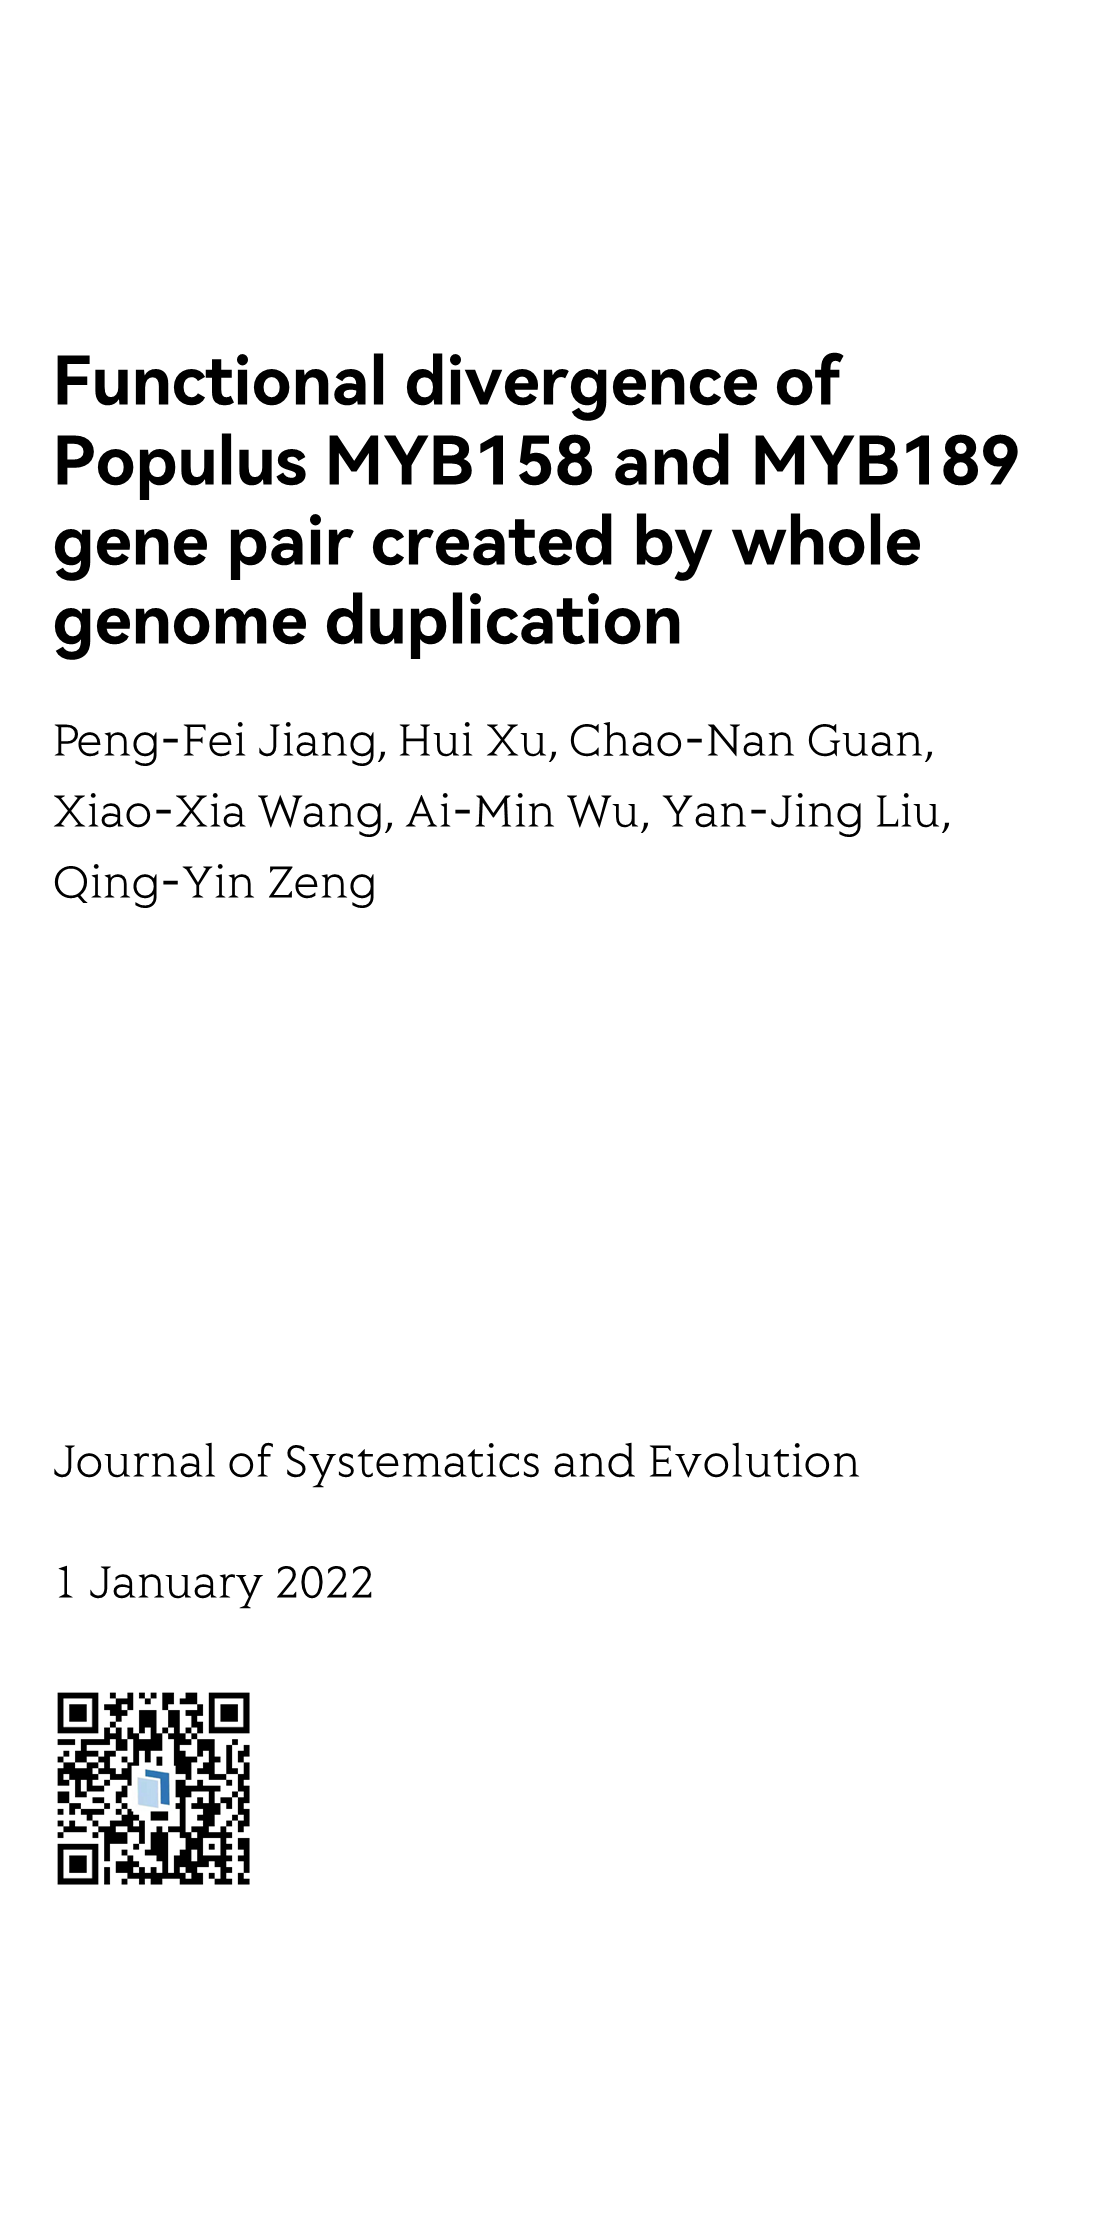 Functional divergence of Populus MYB158 and MYB189 gene pair created by whole genome duplication_1